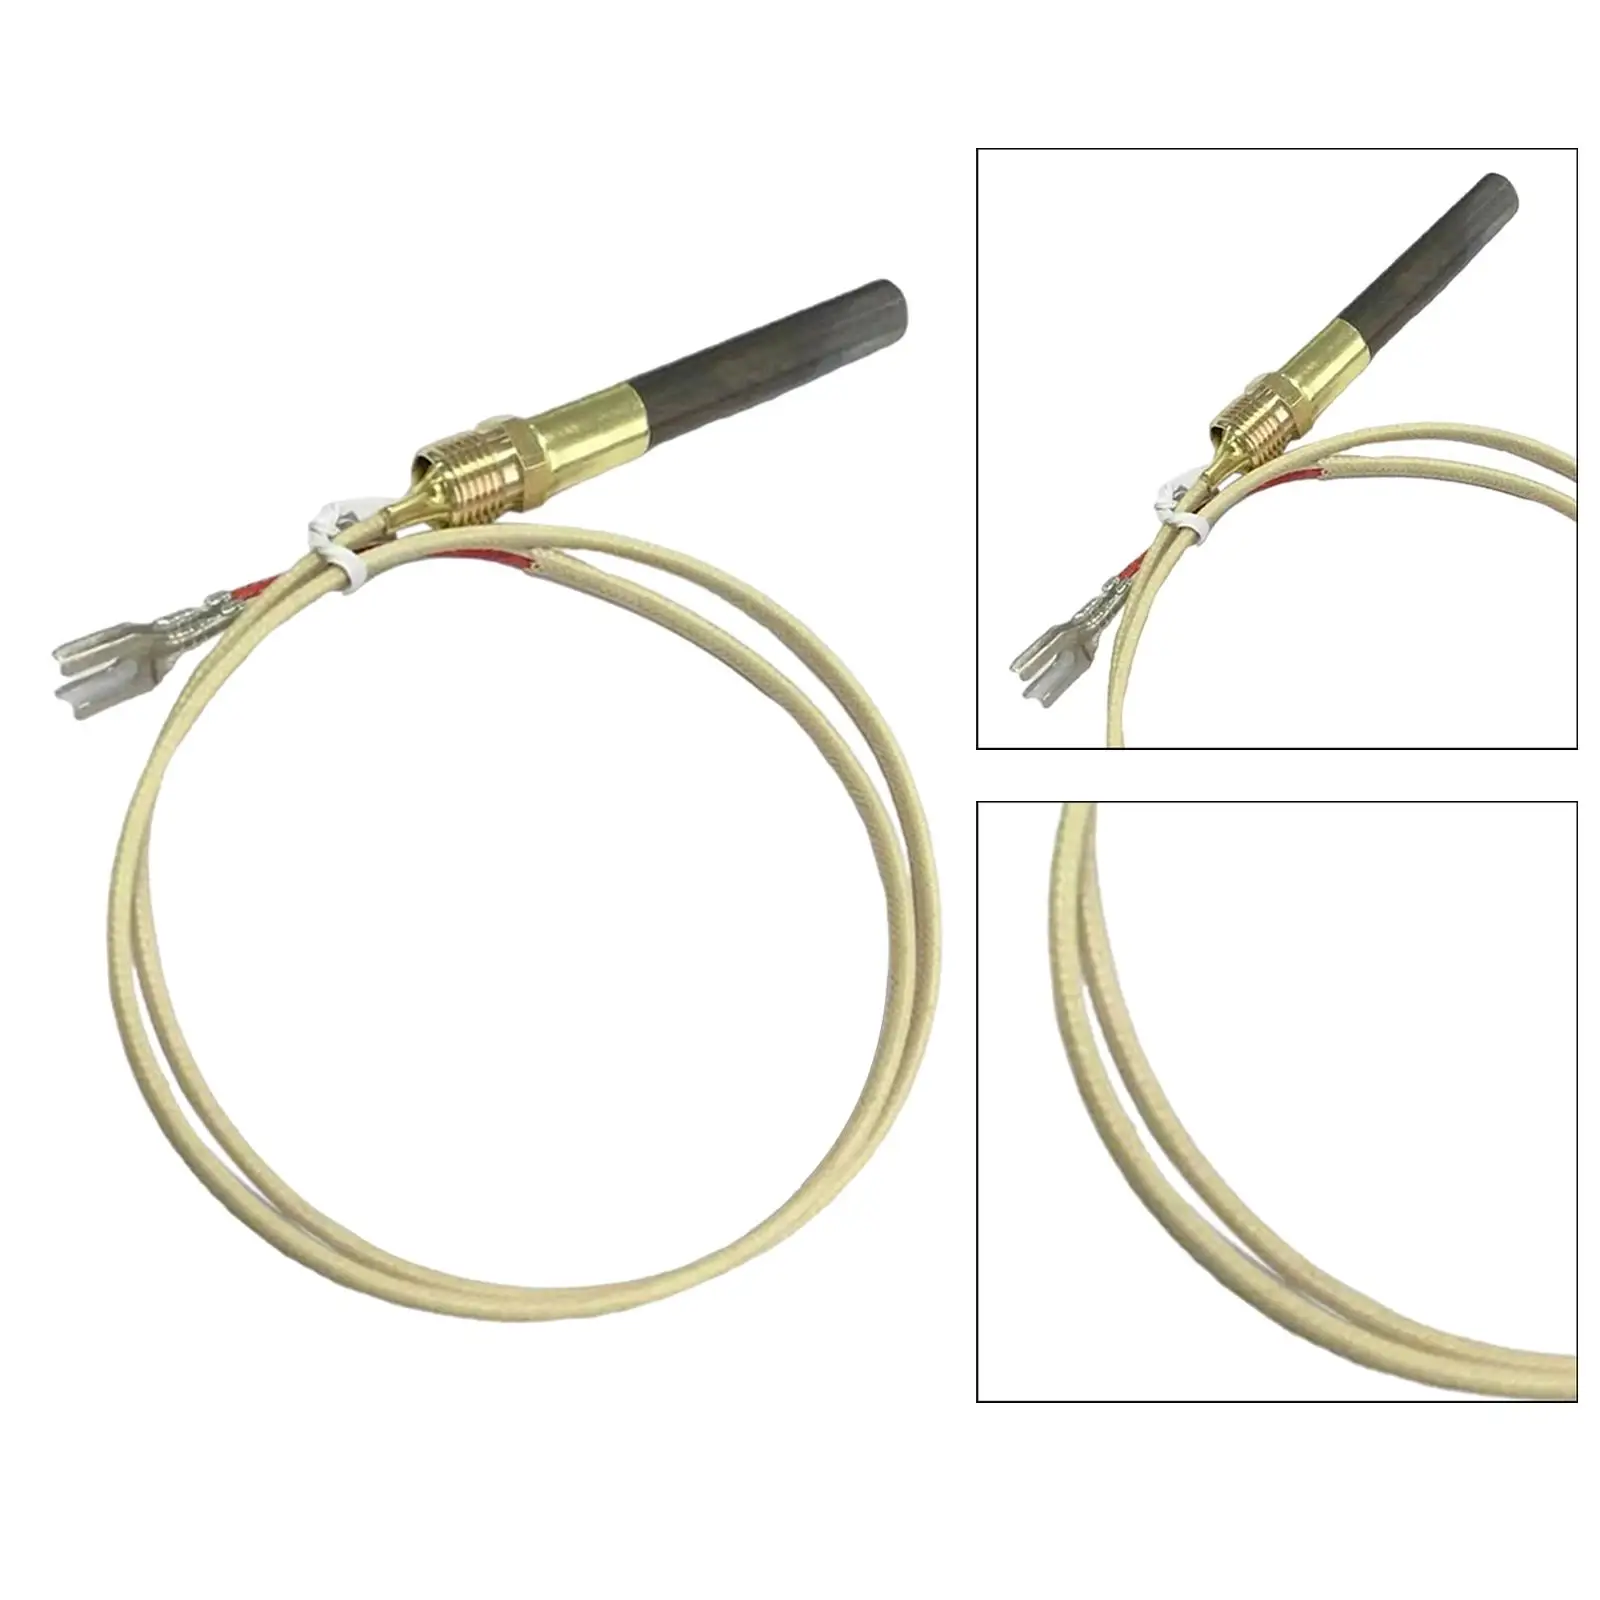 Gas Fireplace Thermopile Thermogenerator Lightweight Durable Heater Thermocouple for Heater Fireplace Brazier Oven Replace Parts